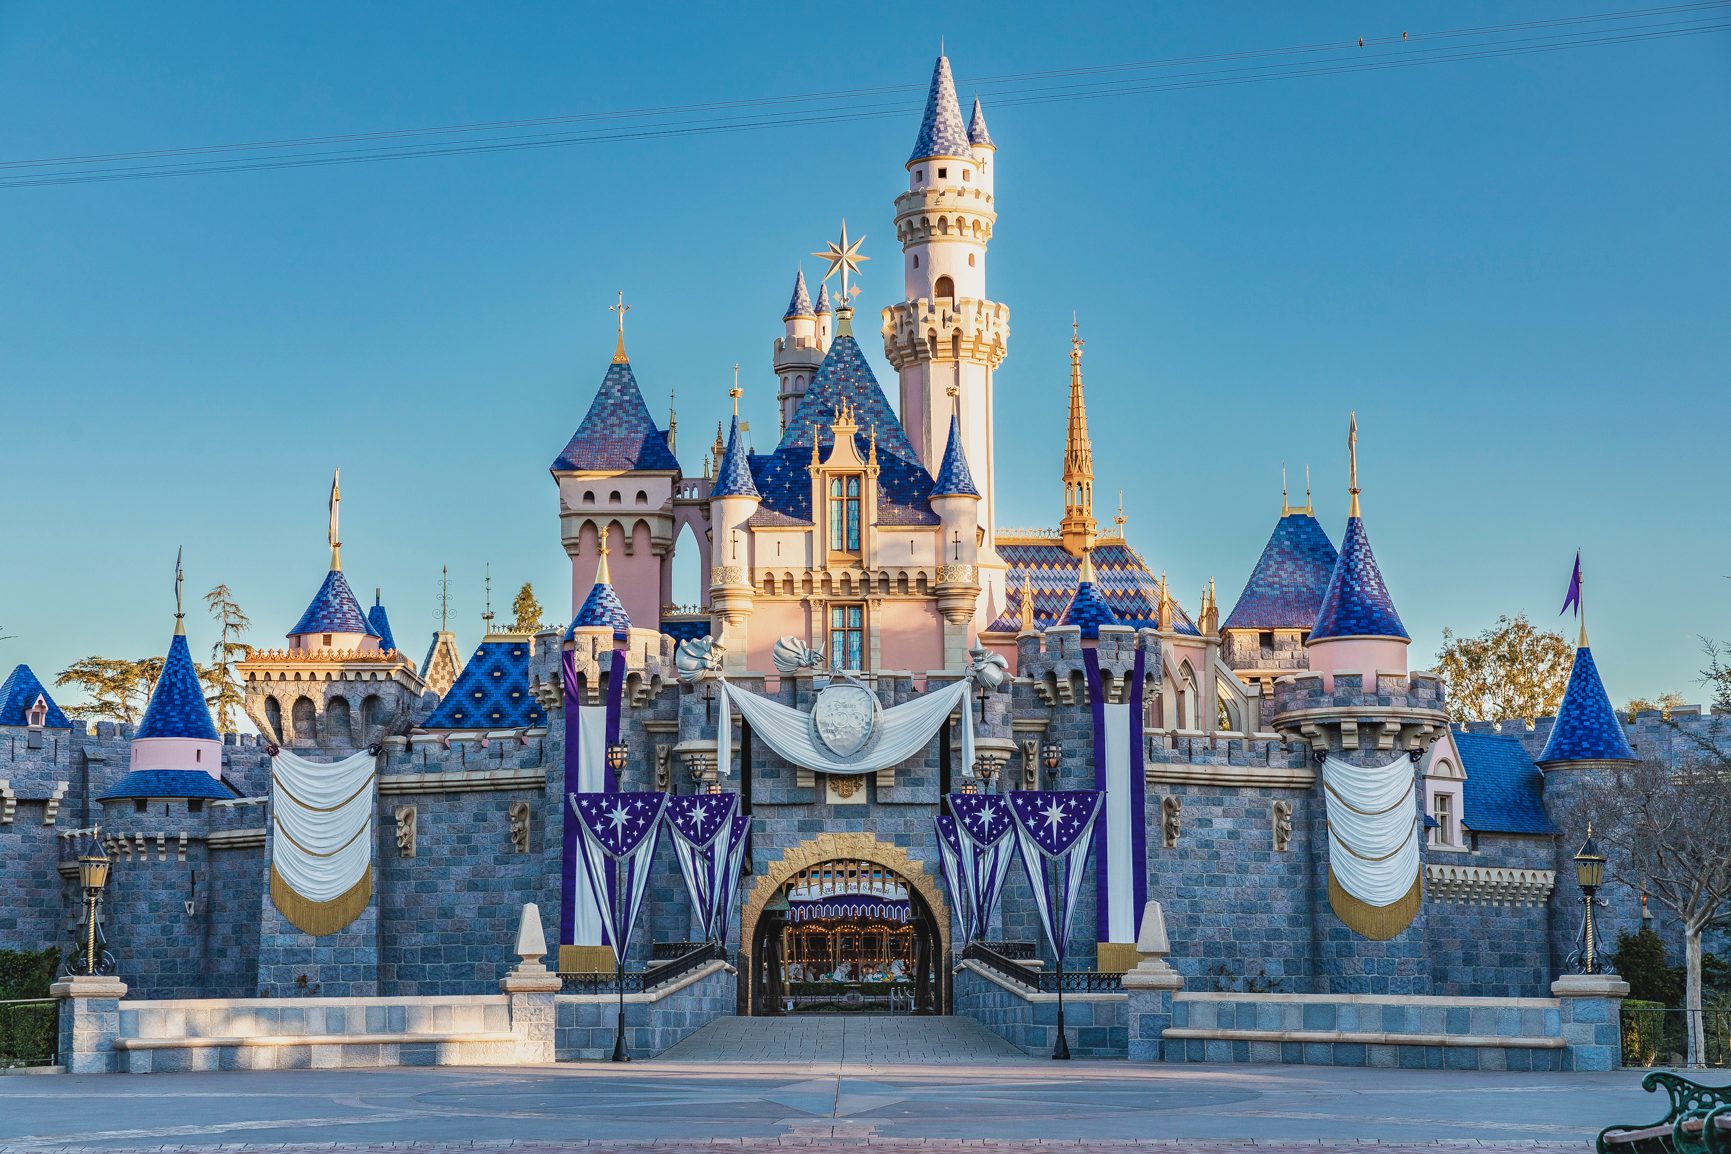 Disneyland Resort Announces Limited-Time Offers for 2020: Kids